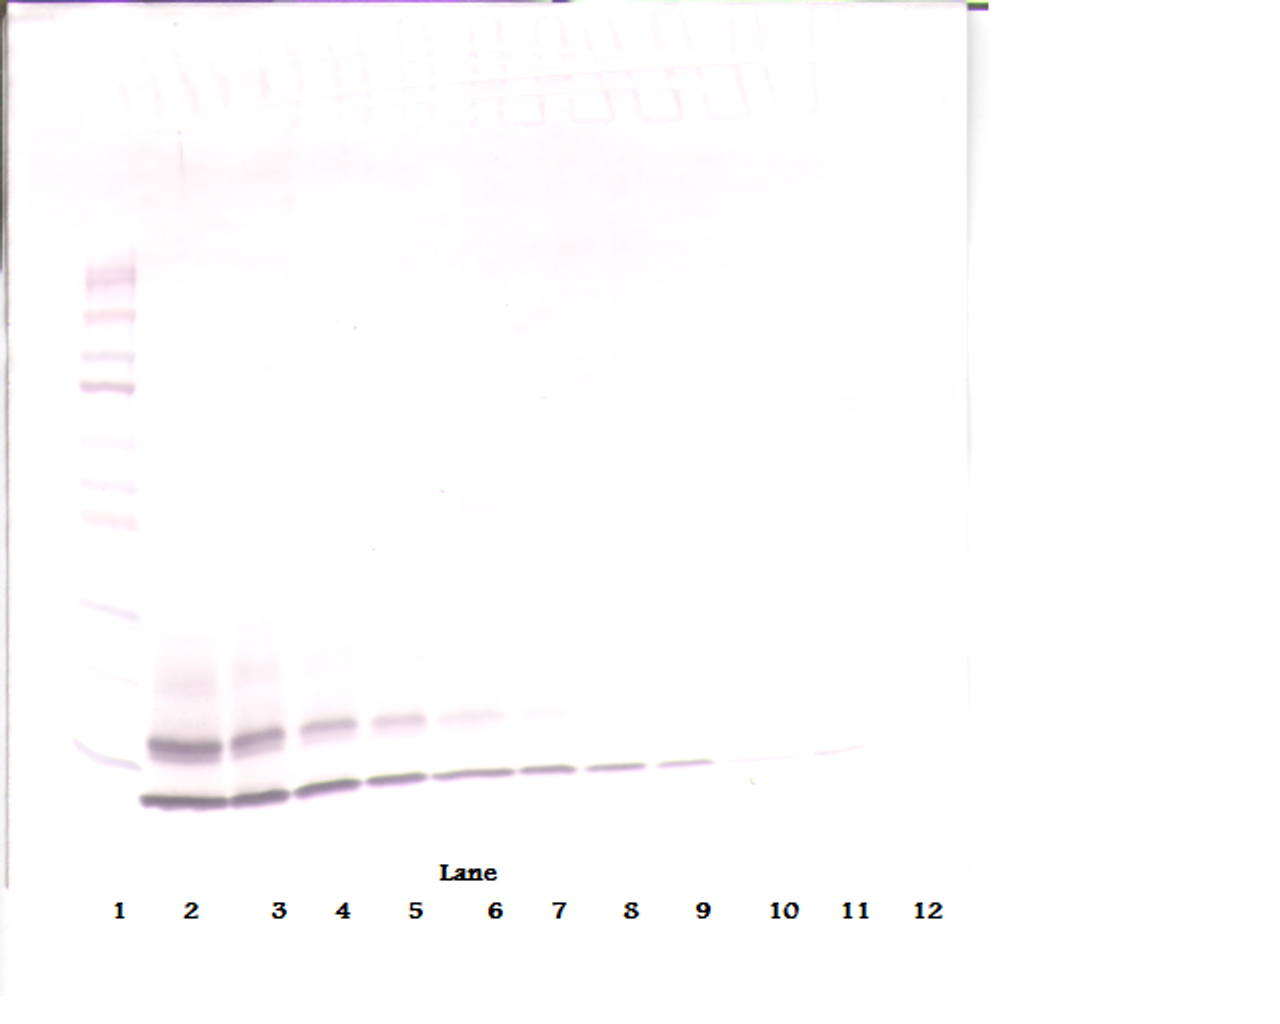 To detect Human MIP-1-beta by Western Blot analysis this antibody can be used at a concentration of 0.1-0.2 ug/ml. When used in conjunction with compatible secondary reagents, the detection limit for recombinant Human MIP-1-beta is 1.5-3.0 ng/lane, under either reducing or non-reducing conditions.